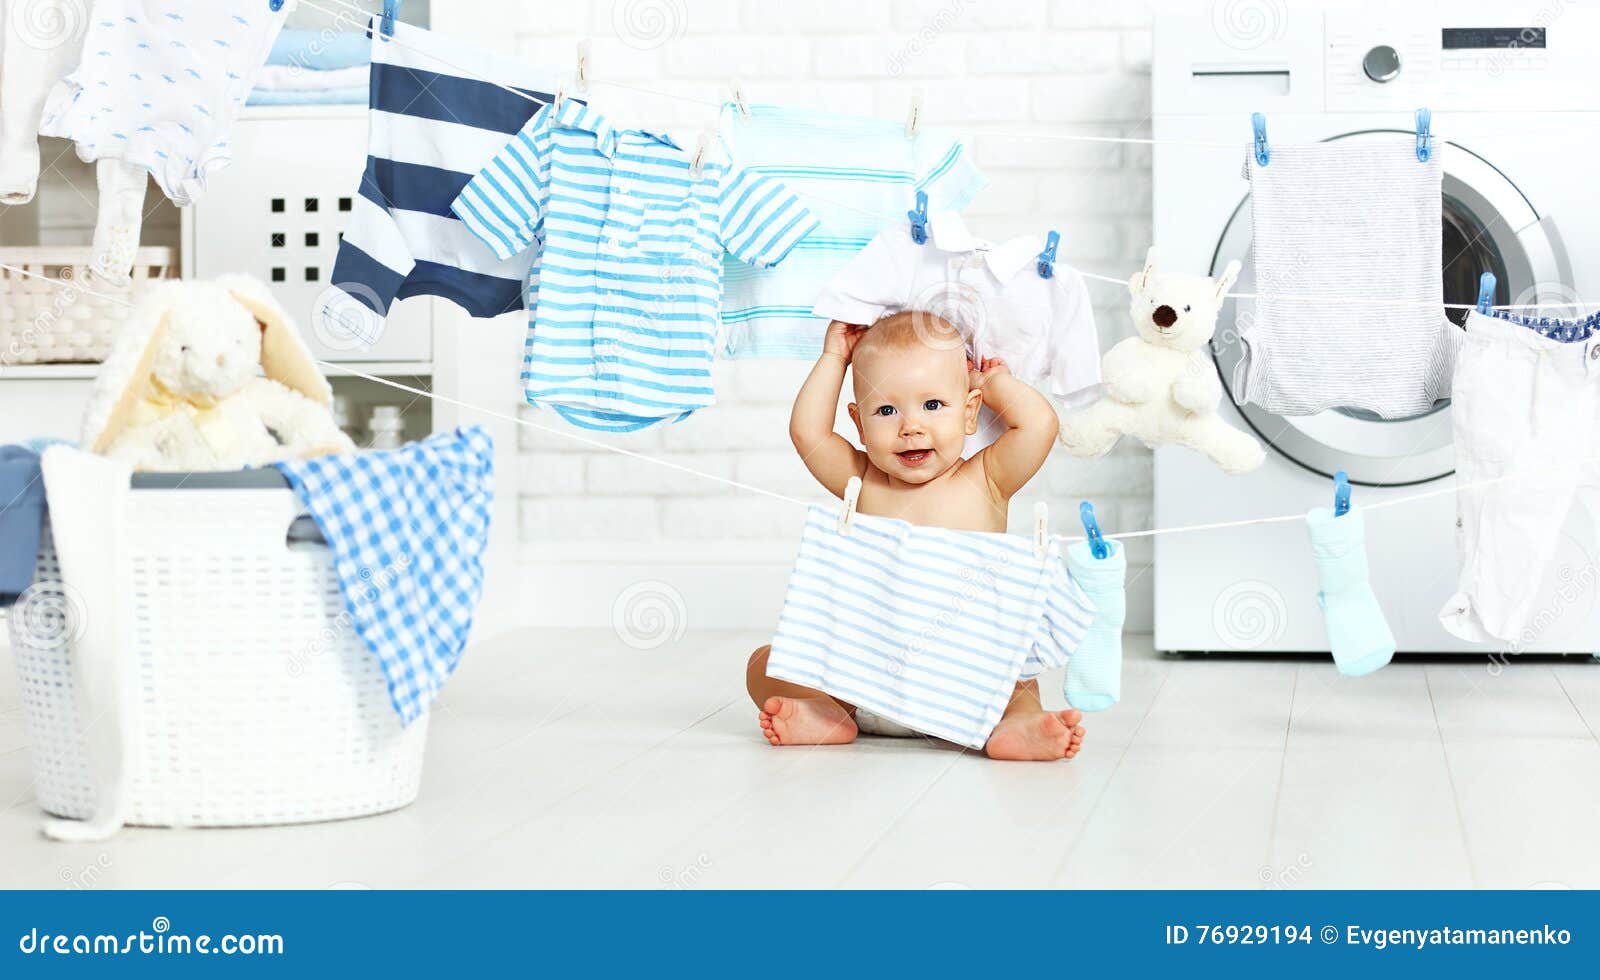 fun happy baby boy to wash clothes and laughs in laundry